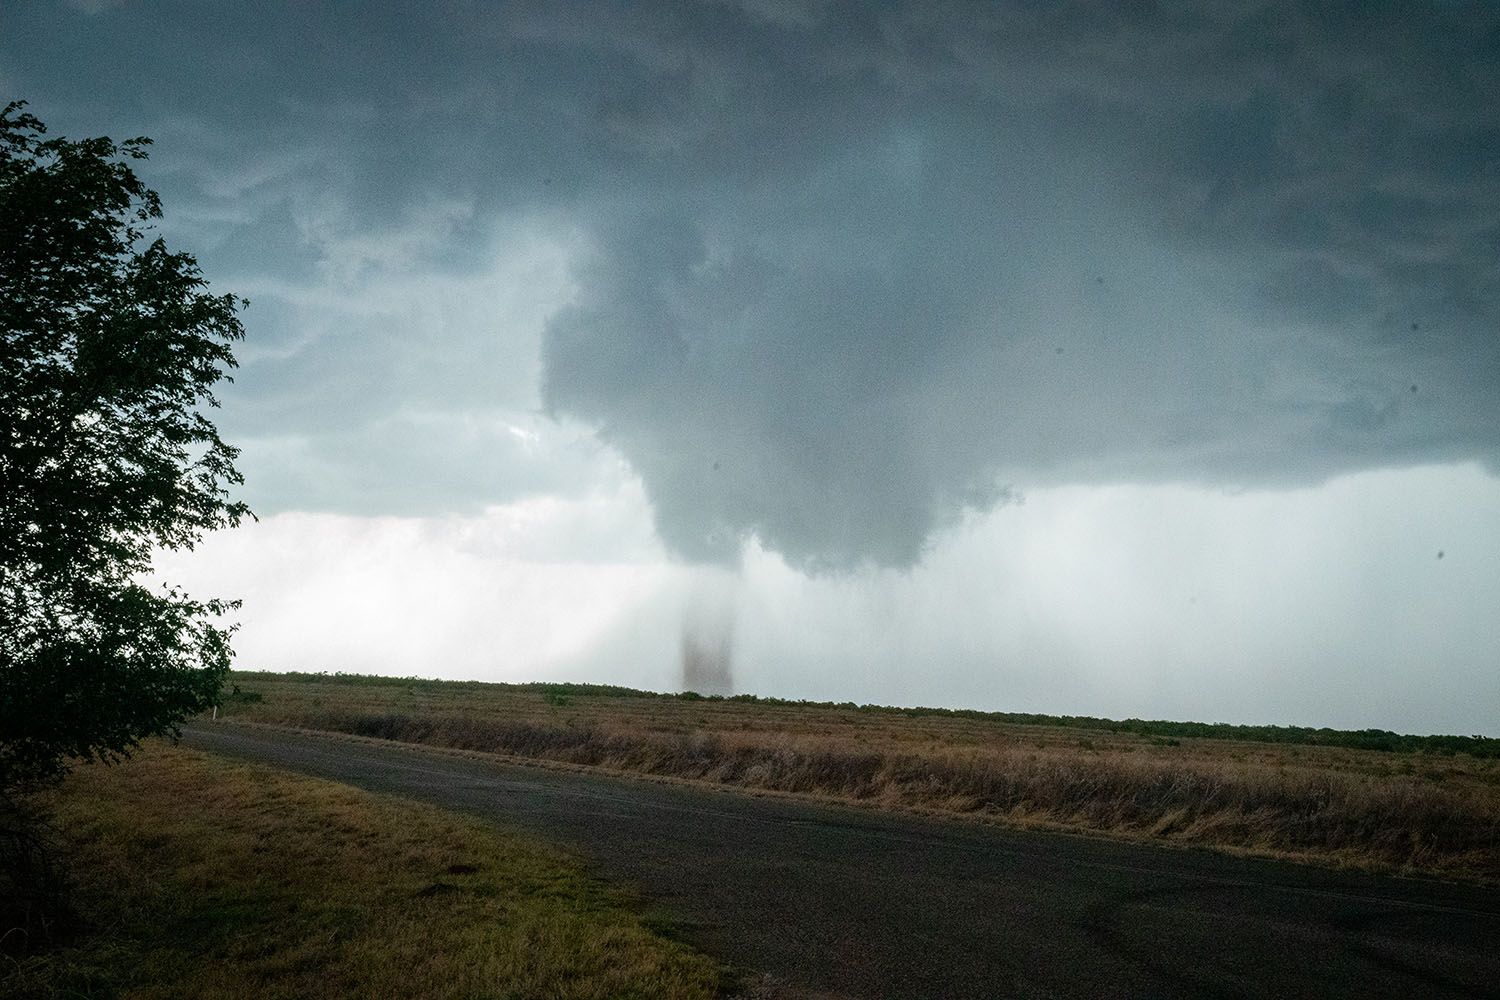 A tornado forms in Texas. “This was actually the best observation of this process I have personally had in nearly 2 decades of chasing because we witnessed the full range of the process” – Dr. Jana Houser 